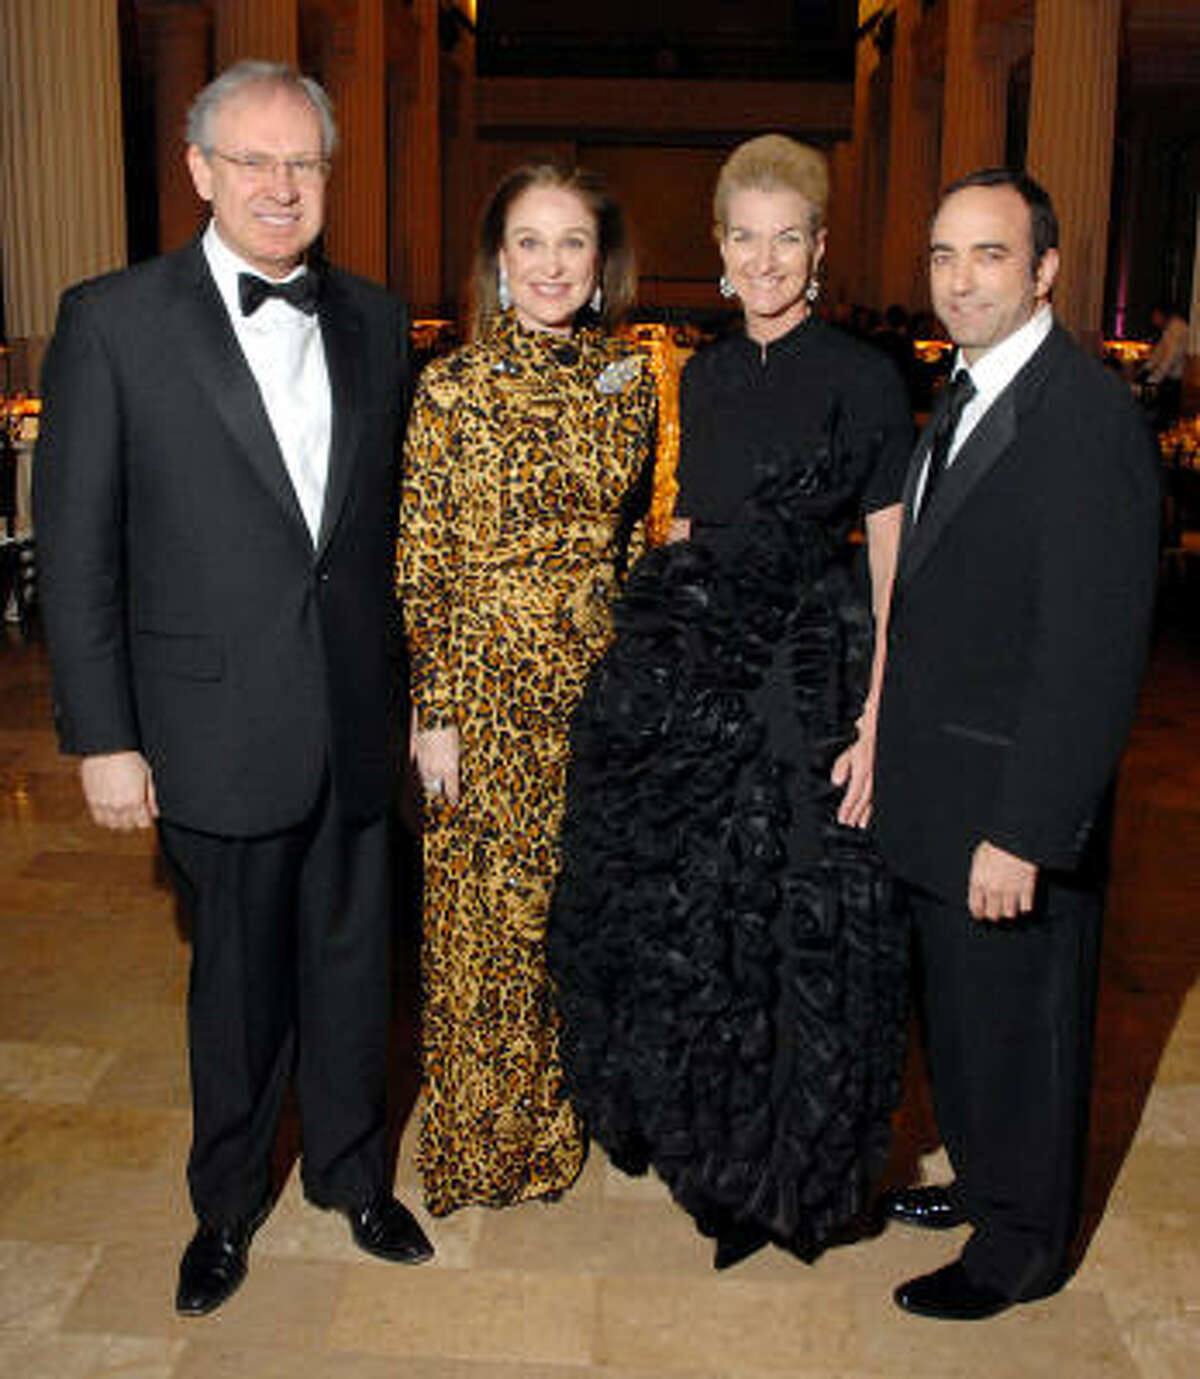 Boys & Girls Harbor gala honorees John and Becca Cason Thrash, from left, joined gala chair Holly Moore and husband Jim Kastleman in setting a high fashion standard for the successful fundraiser.